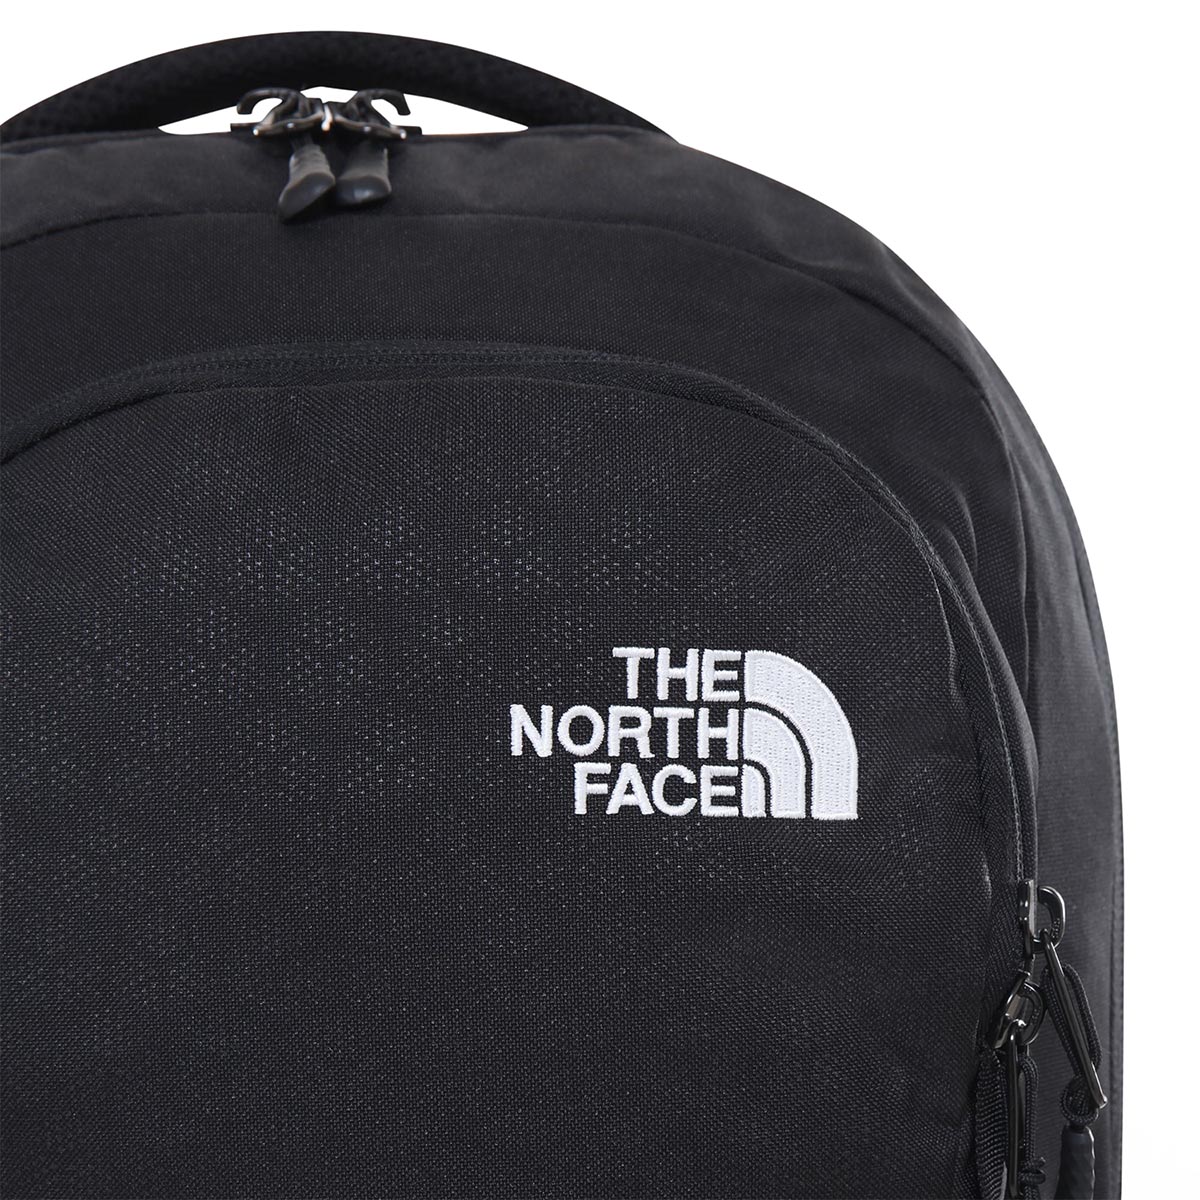 THE NORTH FACE - CONNECTOR 28 L